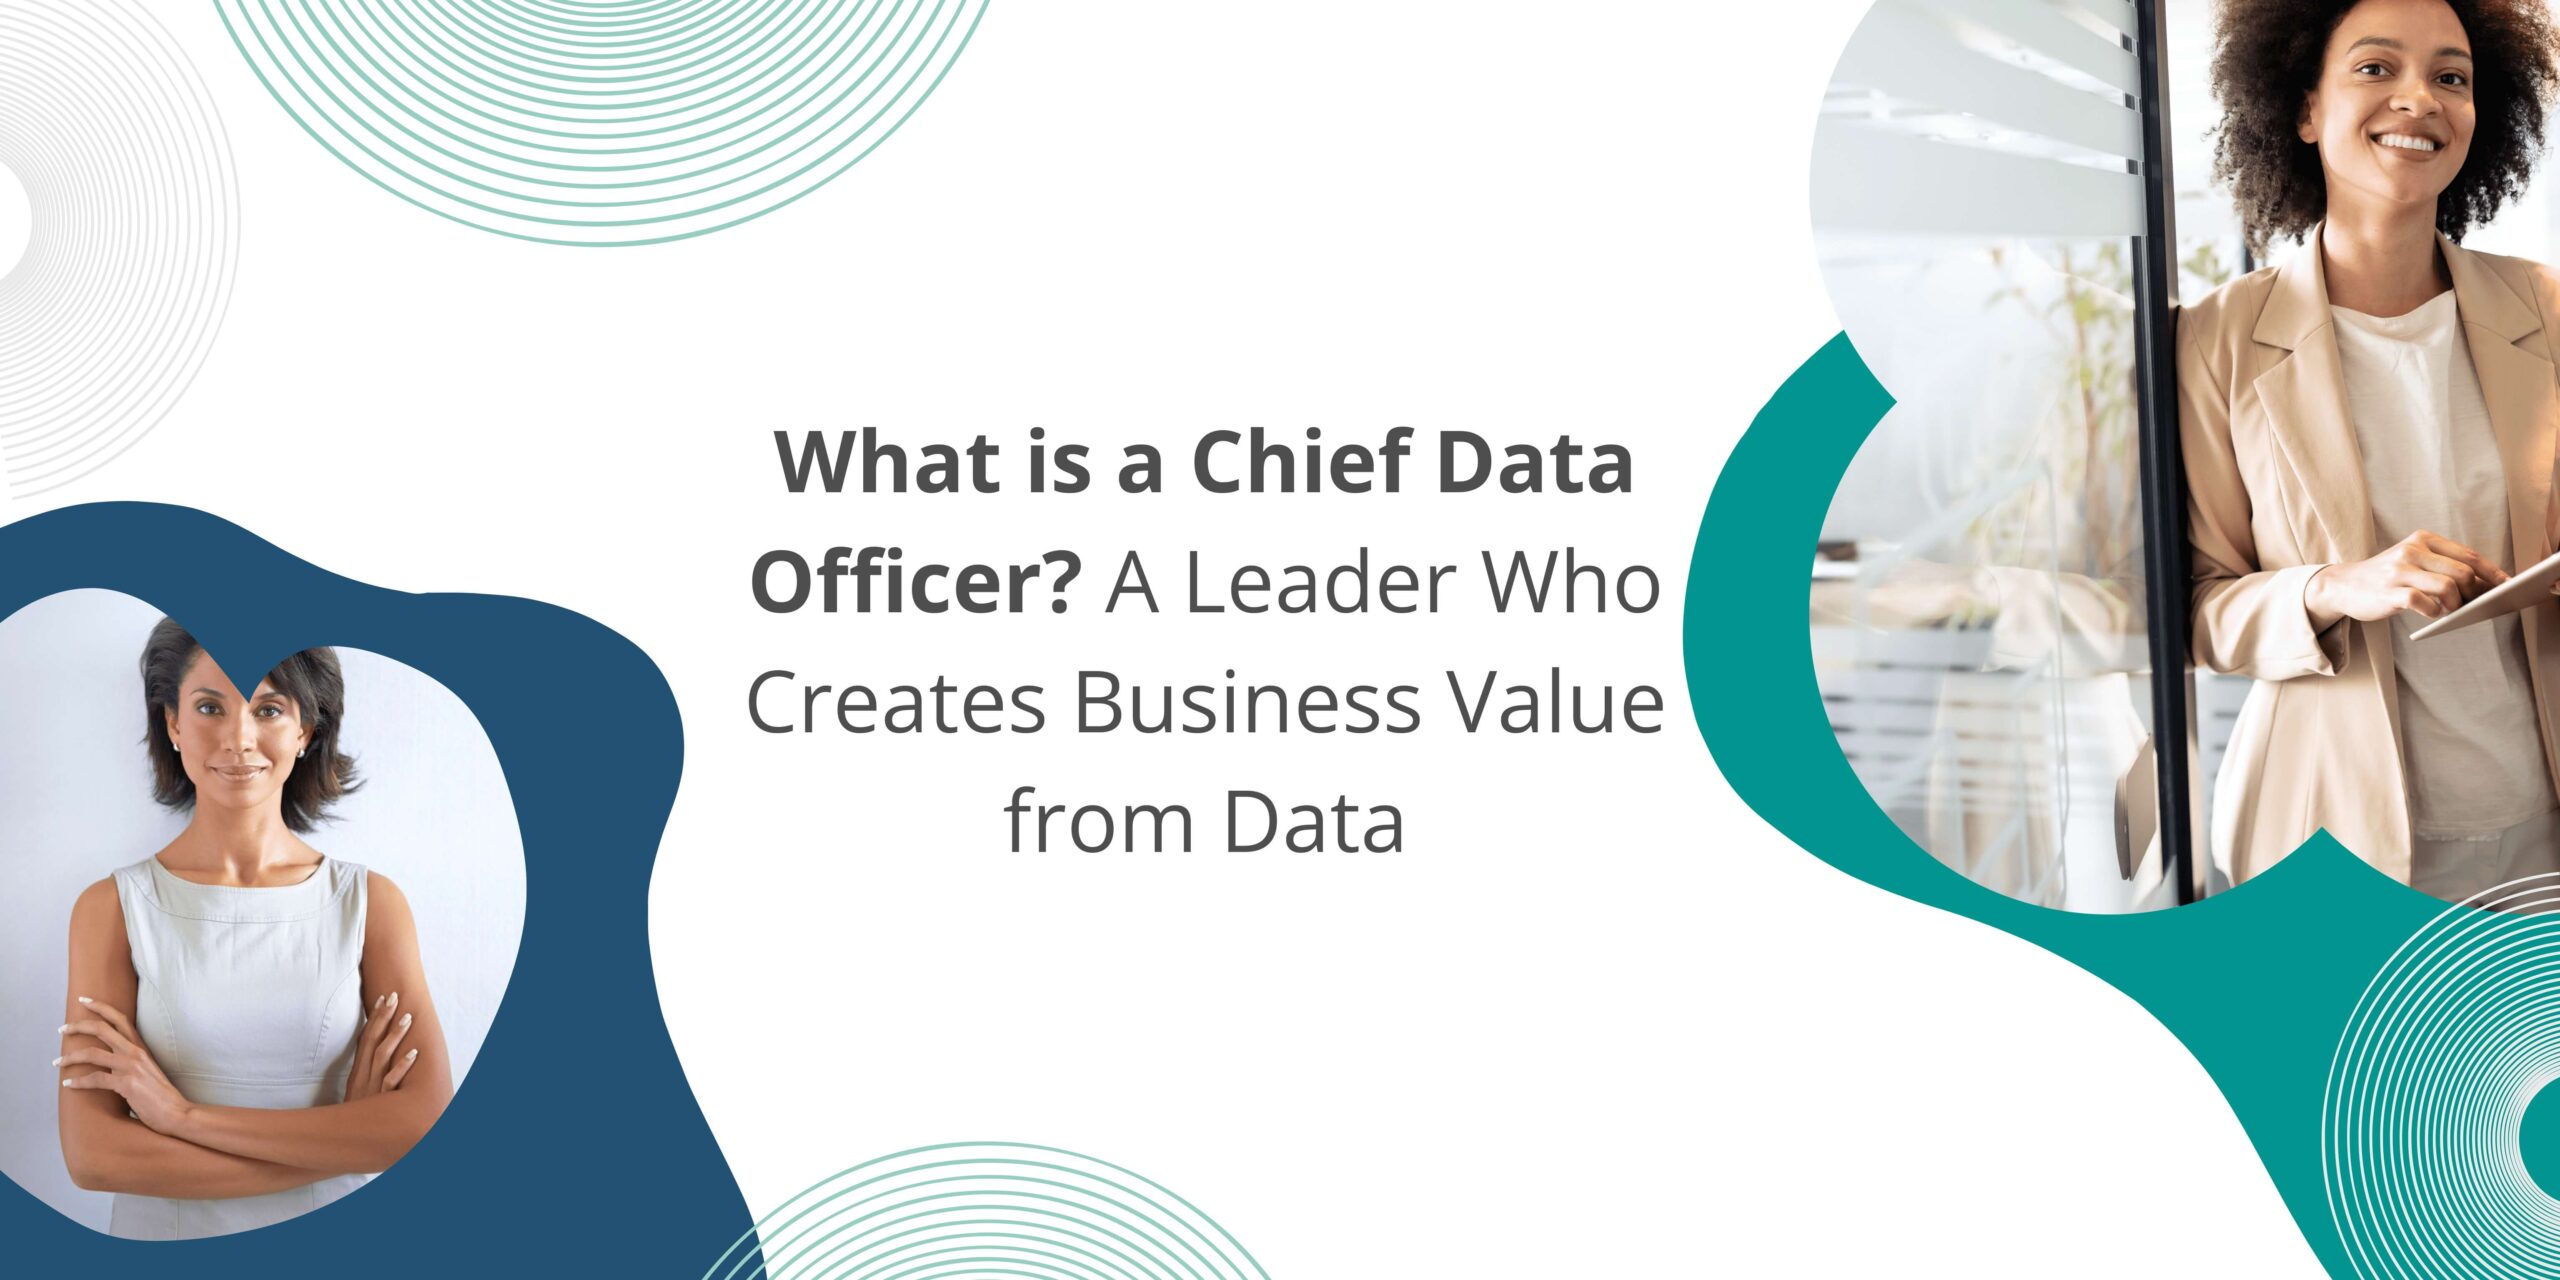 What is a Chief Data Officer?